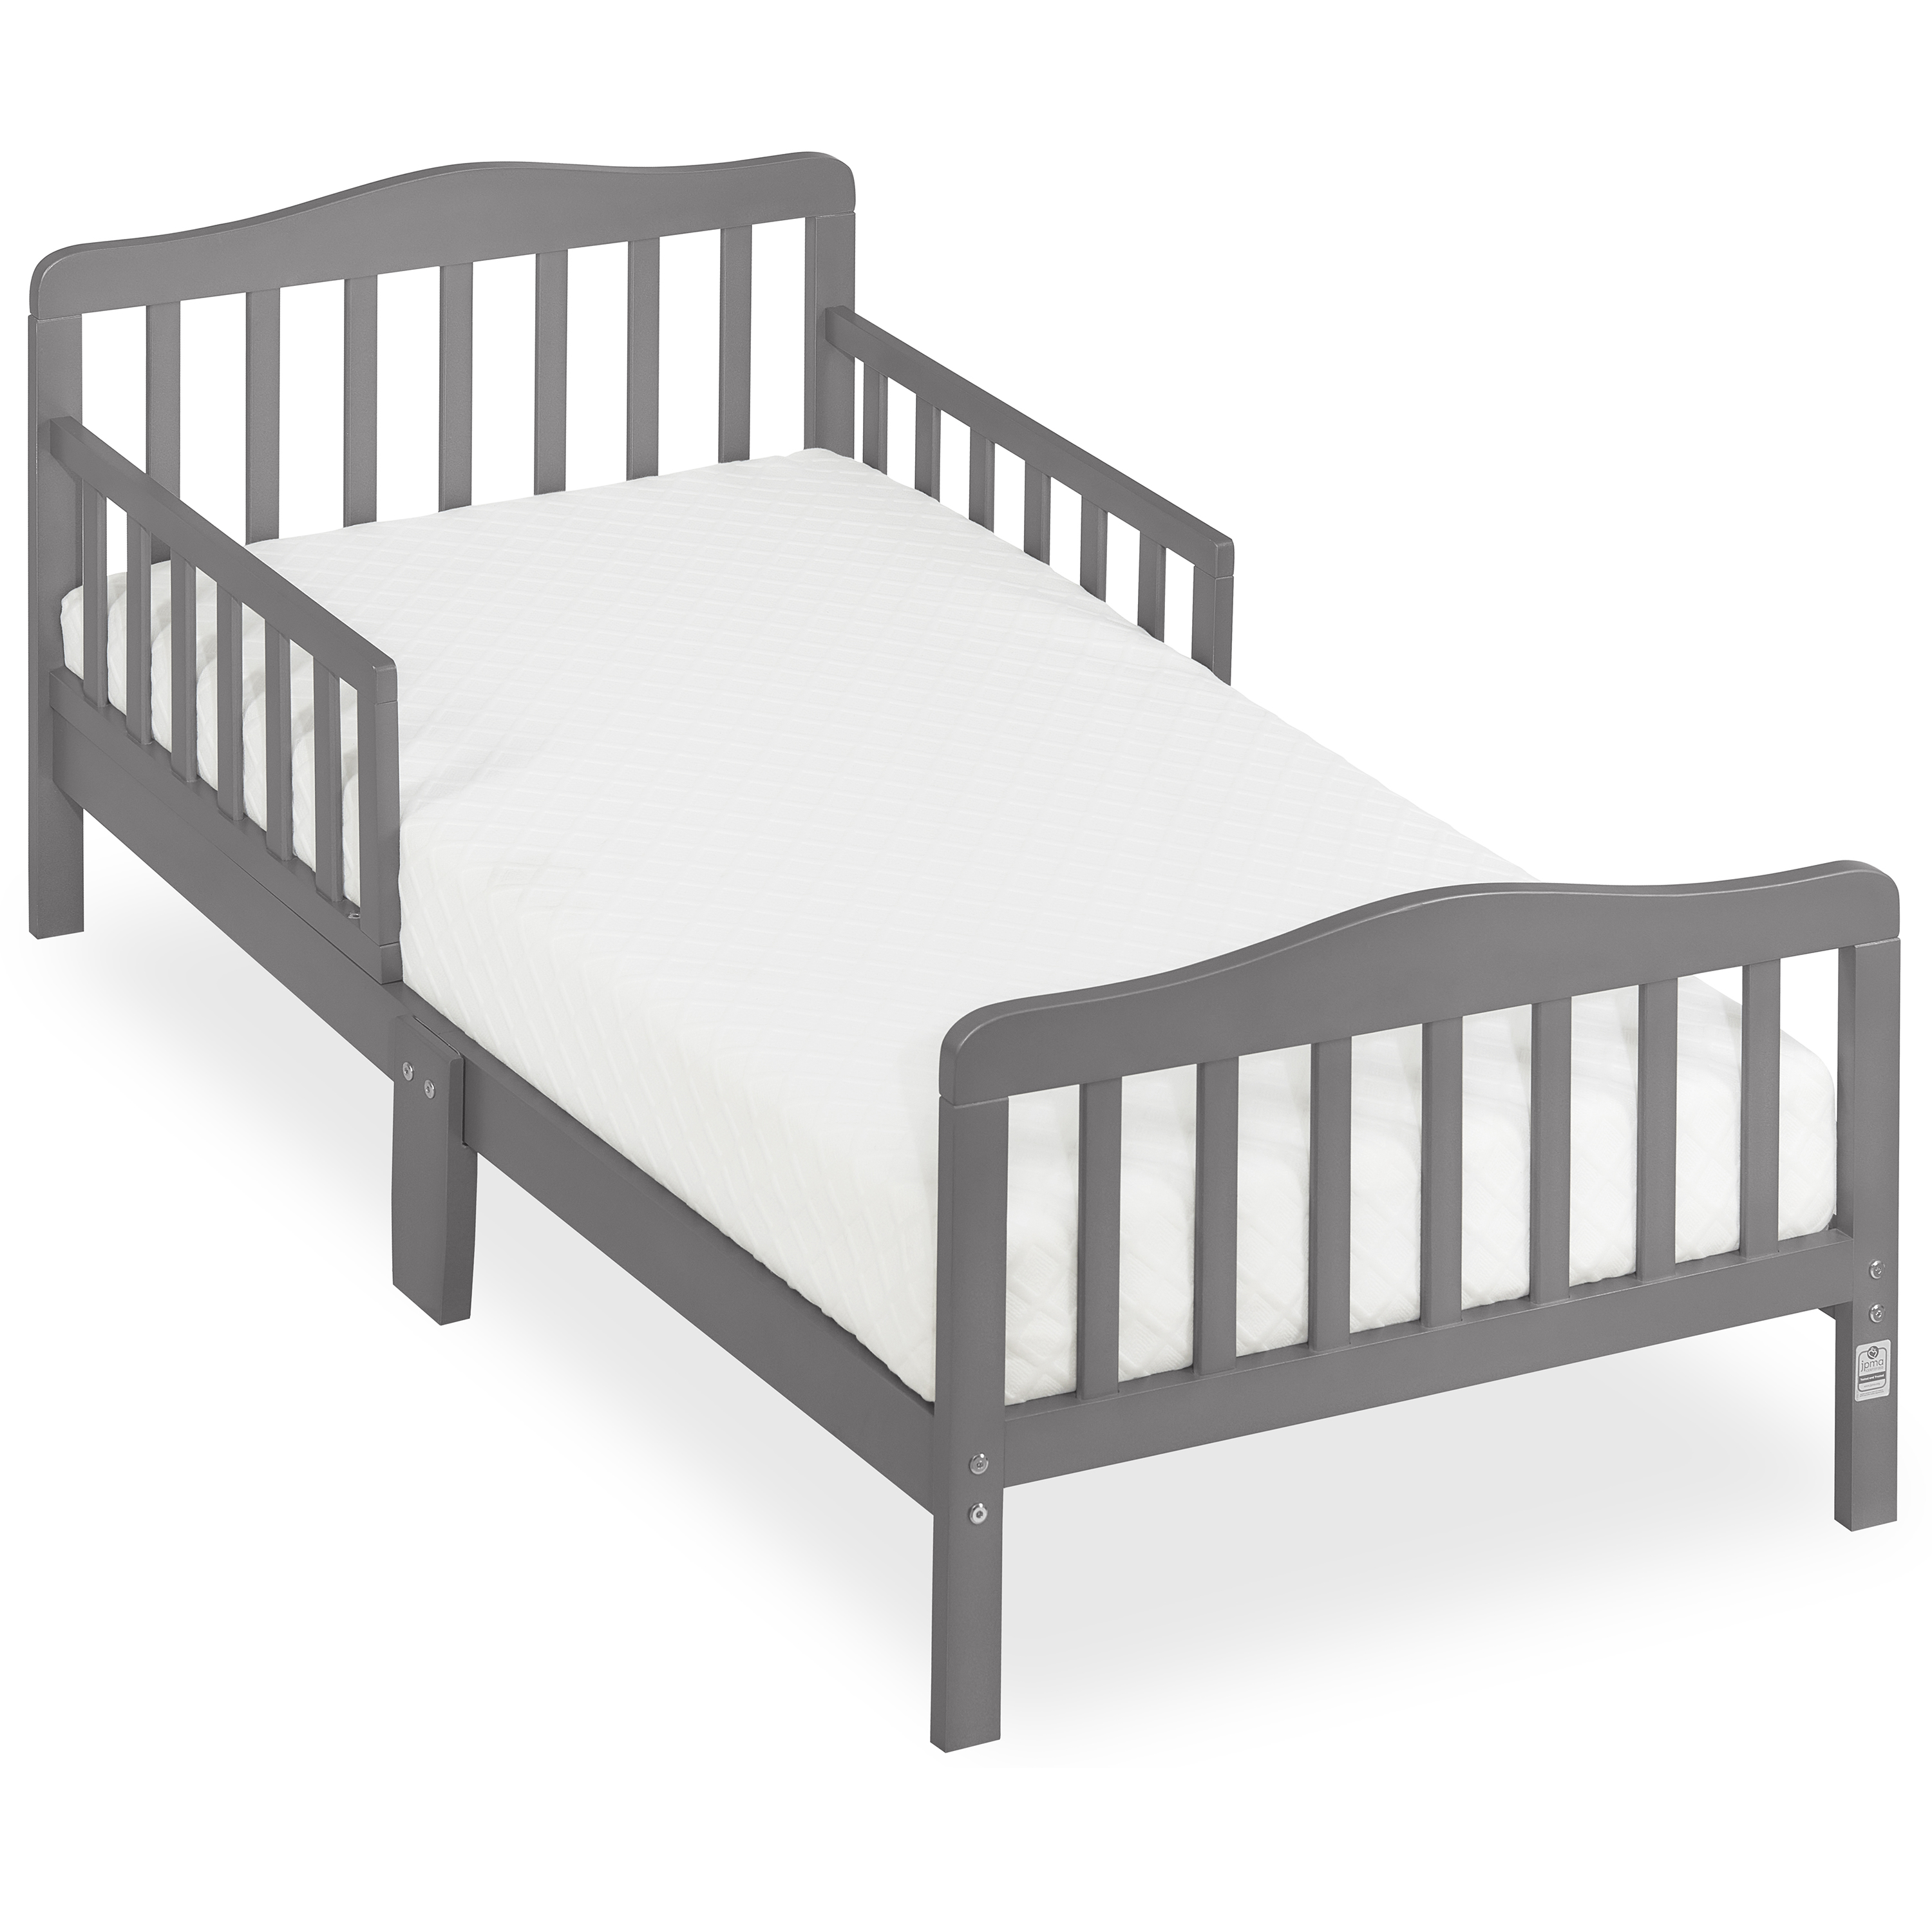 Dream On Me Classic Design Toddler Bed, Steel Grey - image 1 of 15